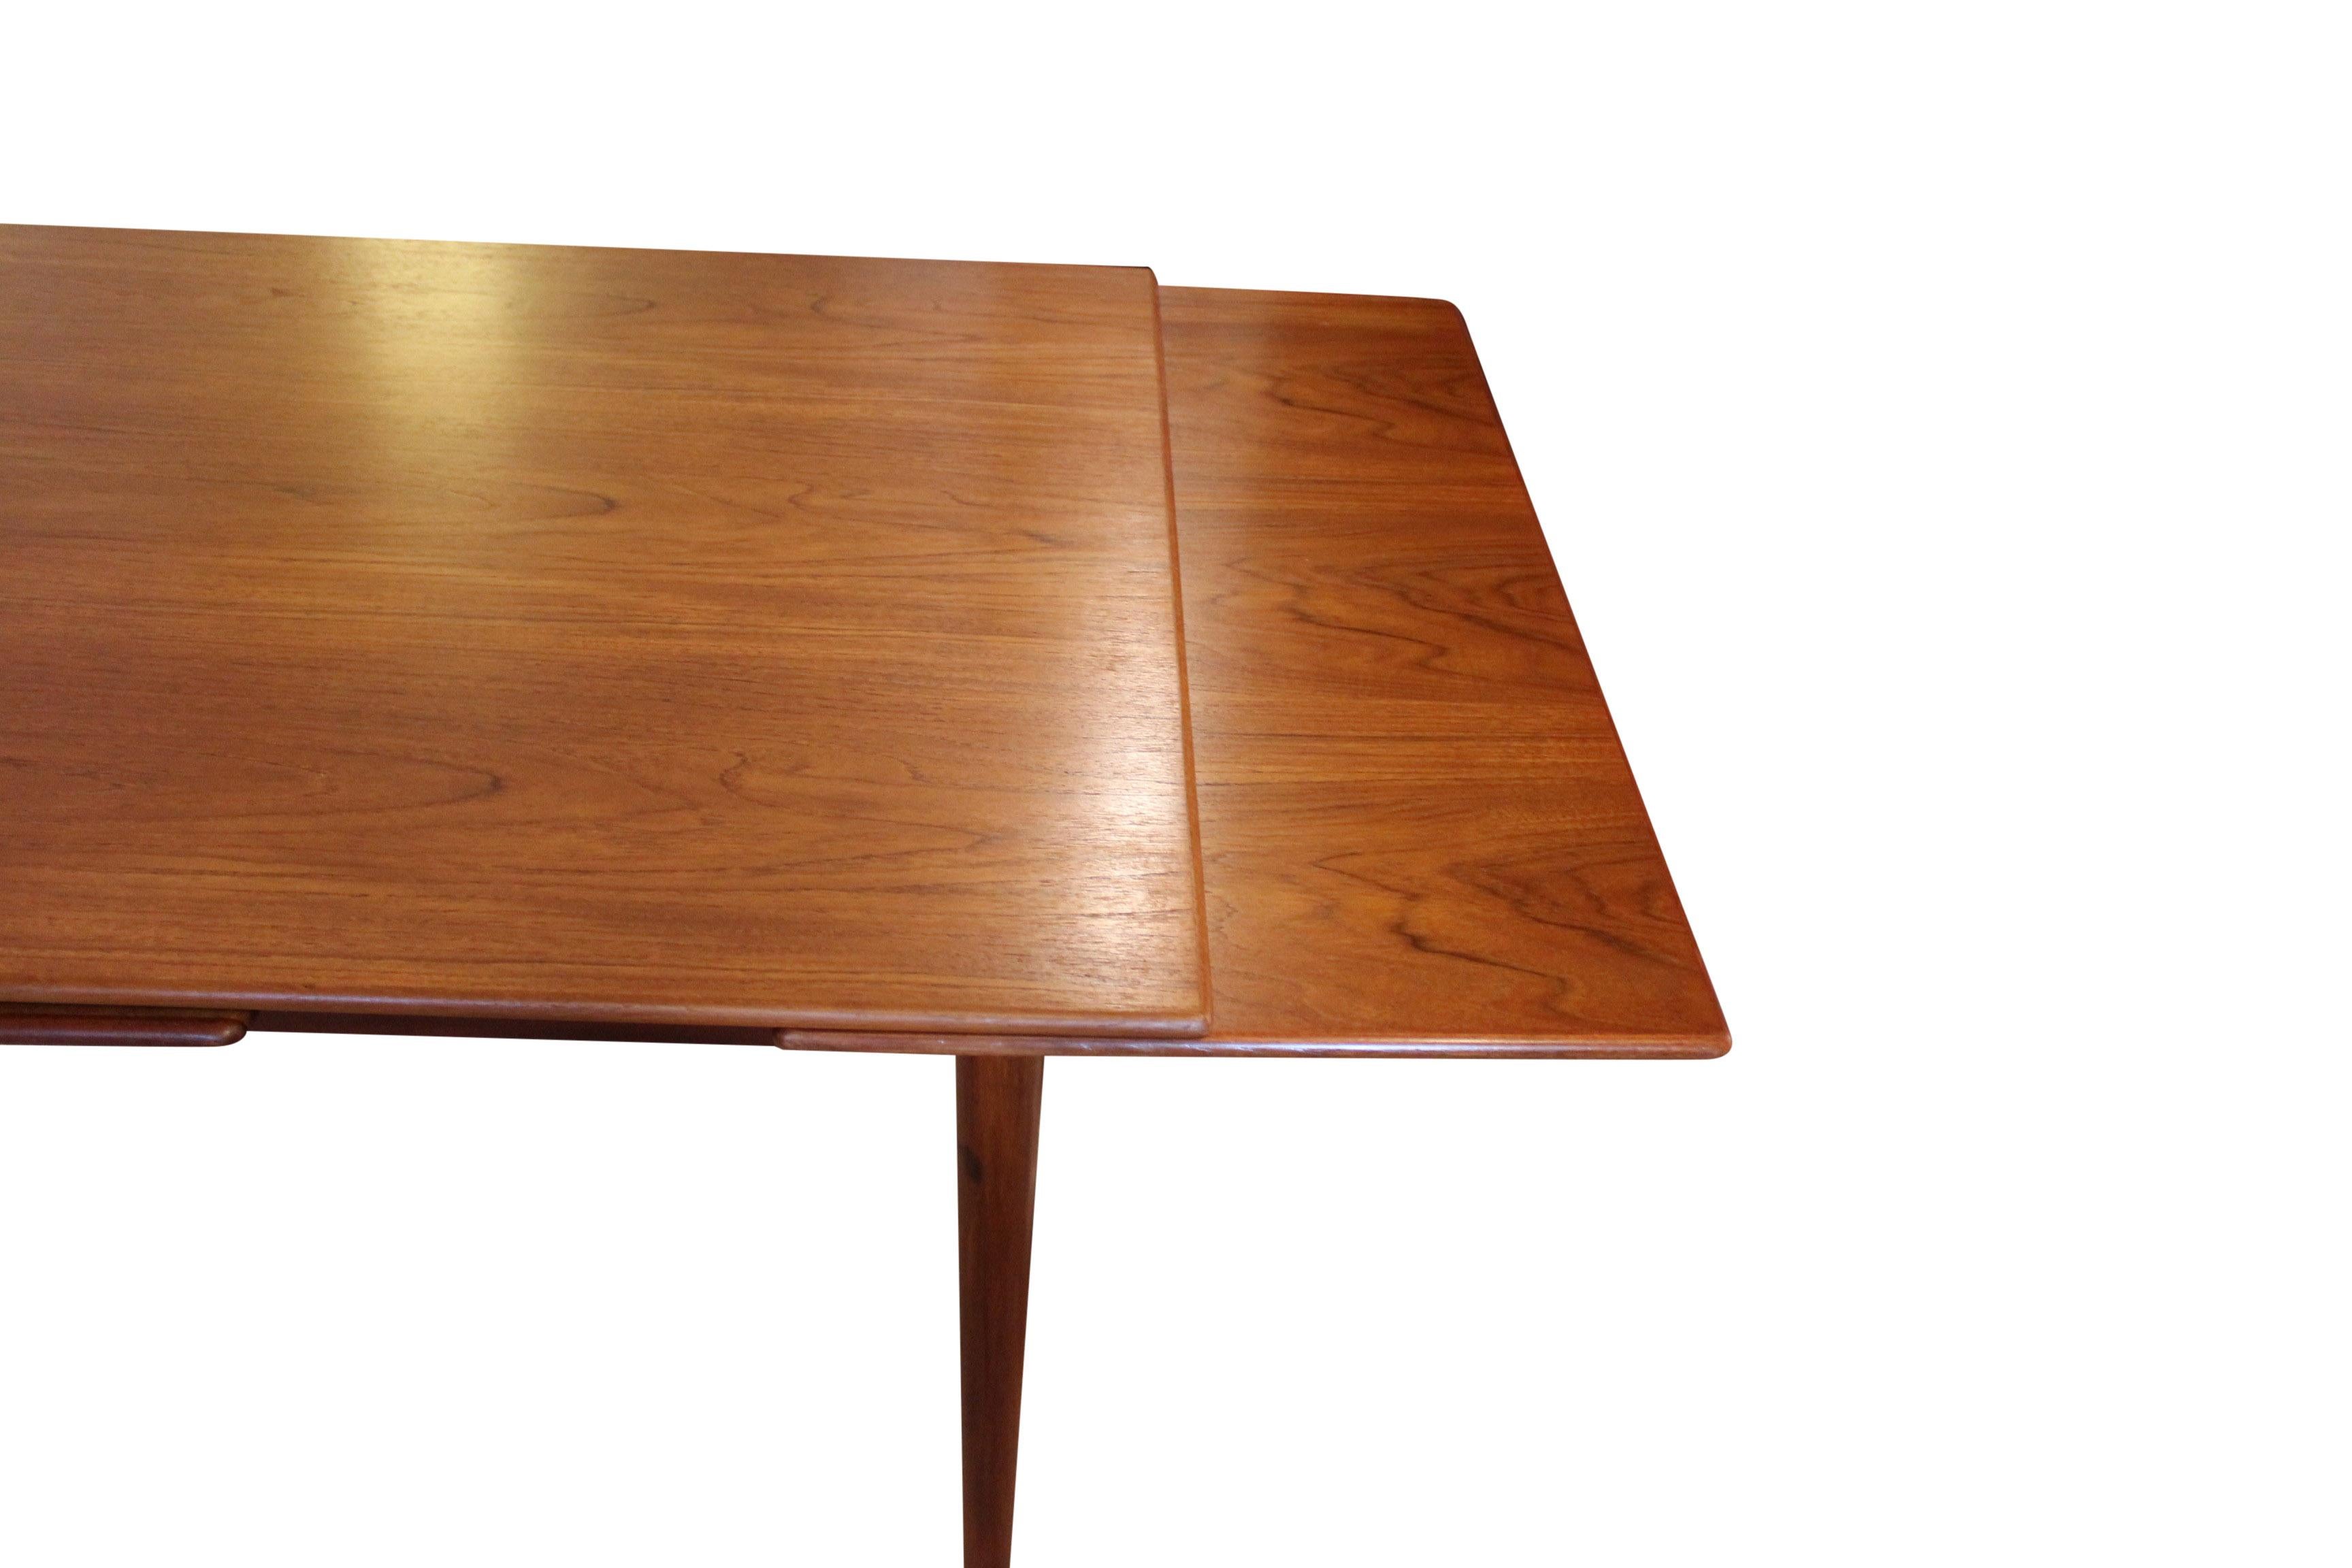 Mid-20th Century Dining Table with Extentions in Teak of Danish Design from the 1960s For Sale